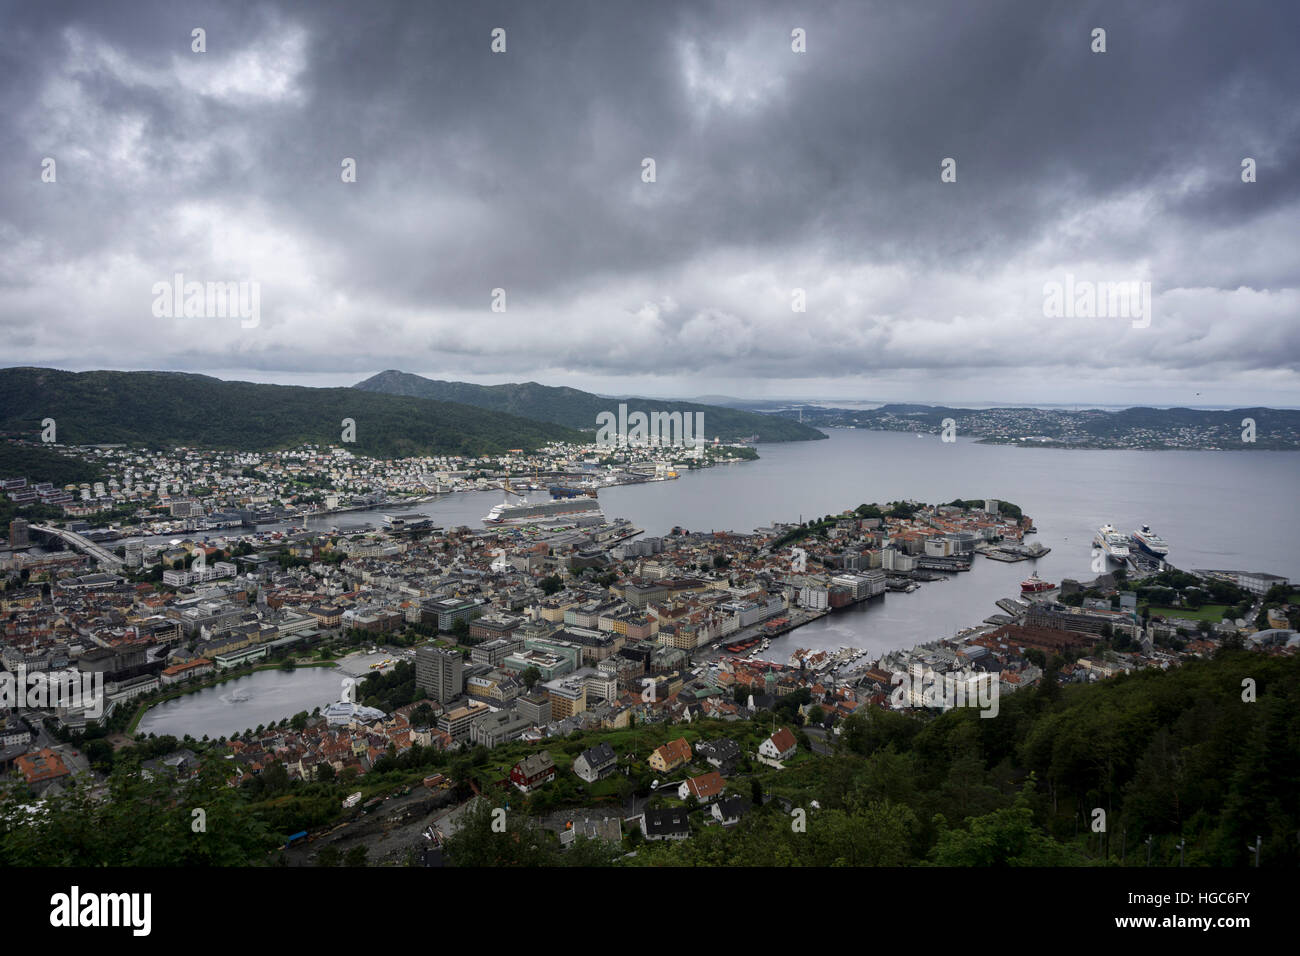 View of Bergen, Norway from Mount Floyen with P & O Brittania in dock Stock Photo